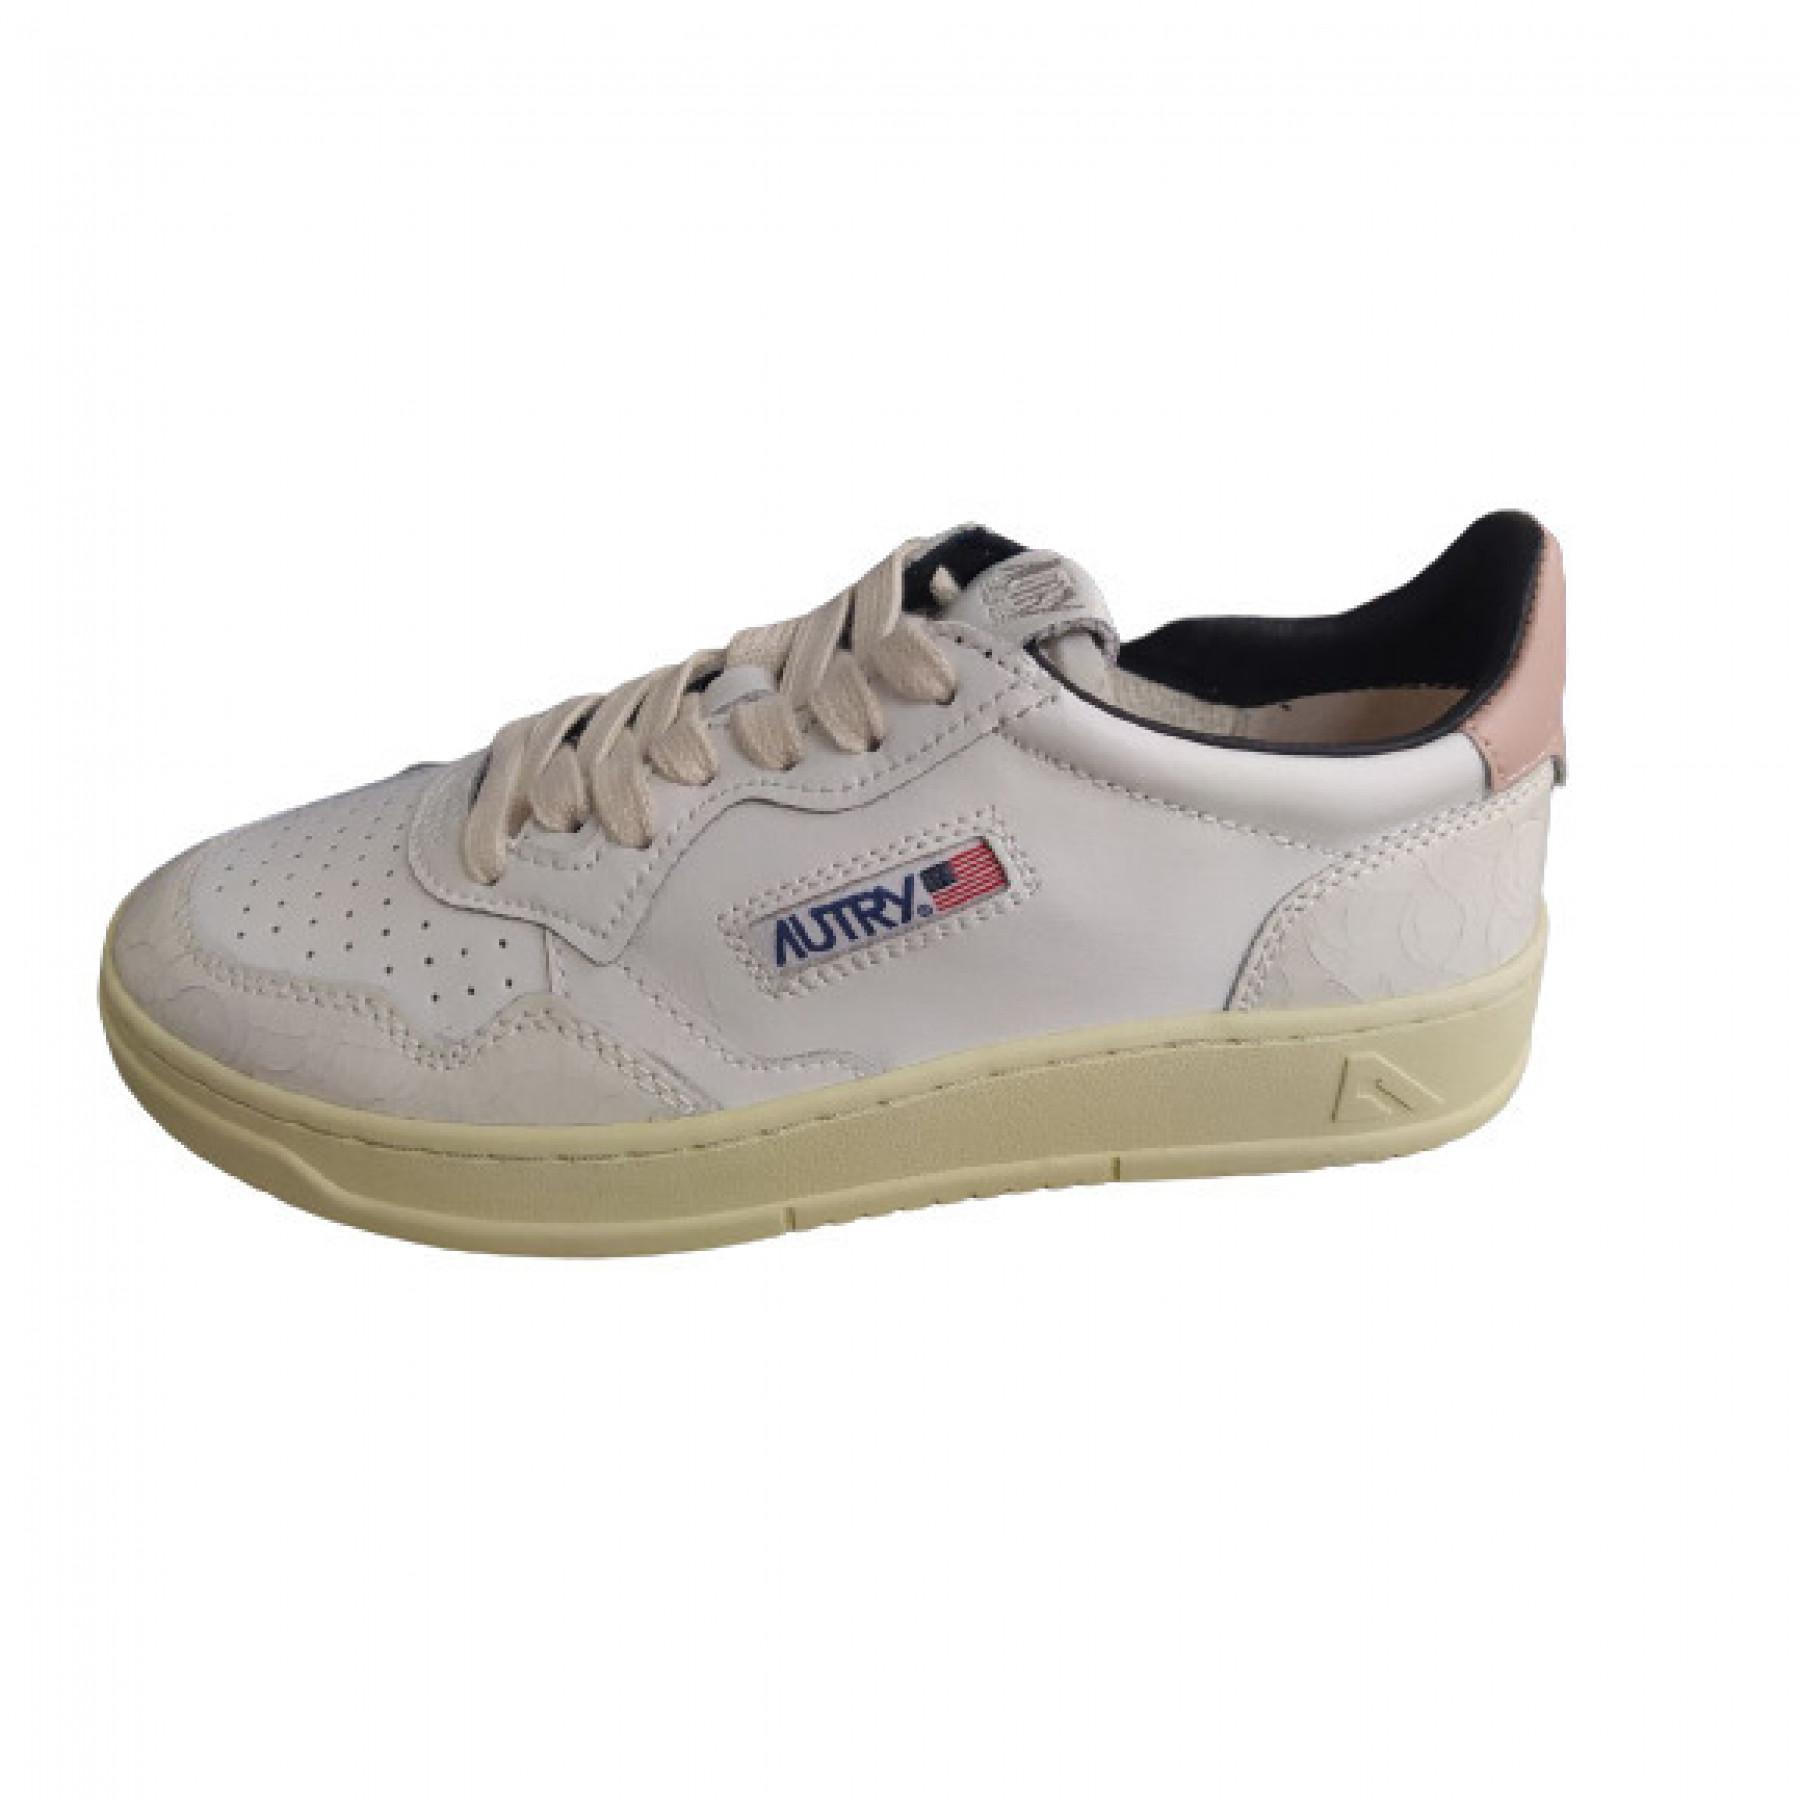 Women's sneakers Autry Medalist WVC11 Leather White/Pink